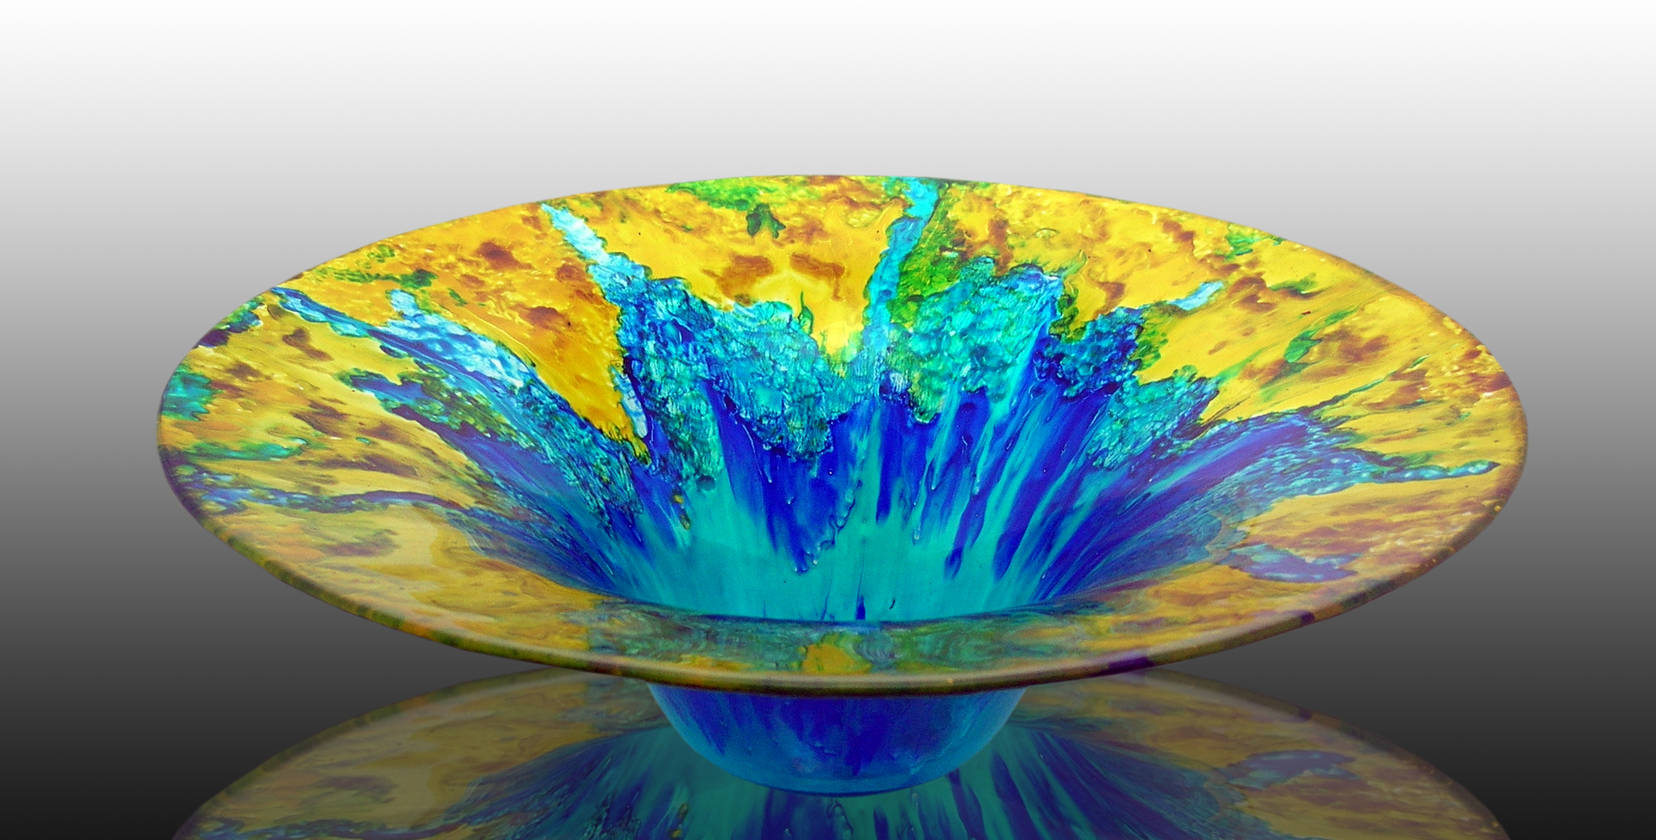 Sand and Water Creations in Glass: Amalia Flaisher